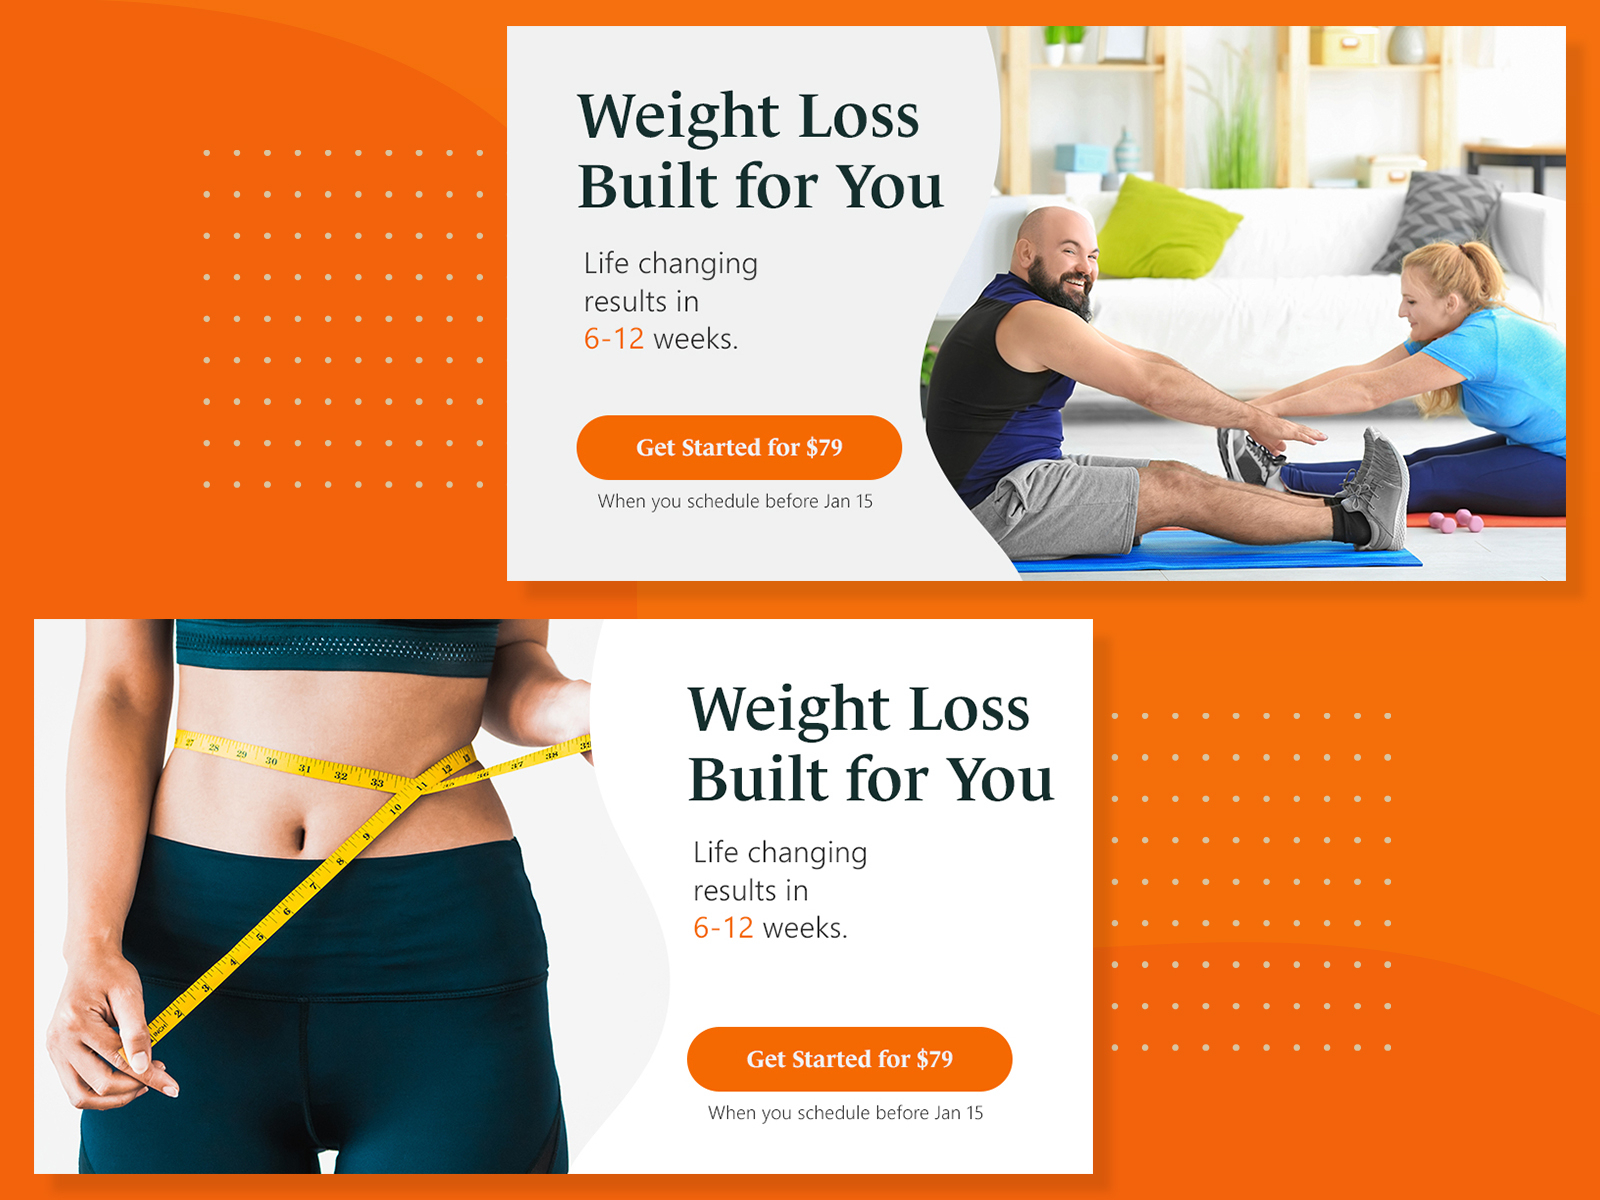 Weight Loss Program // Facebook Ads by Nick Gibson for Linear Design on